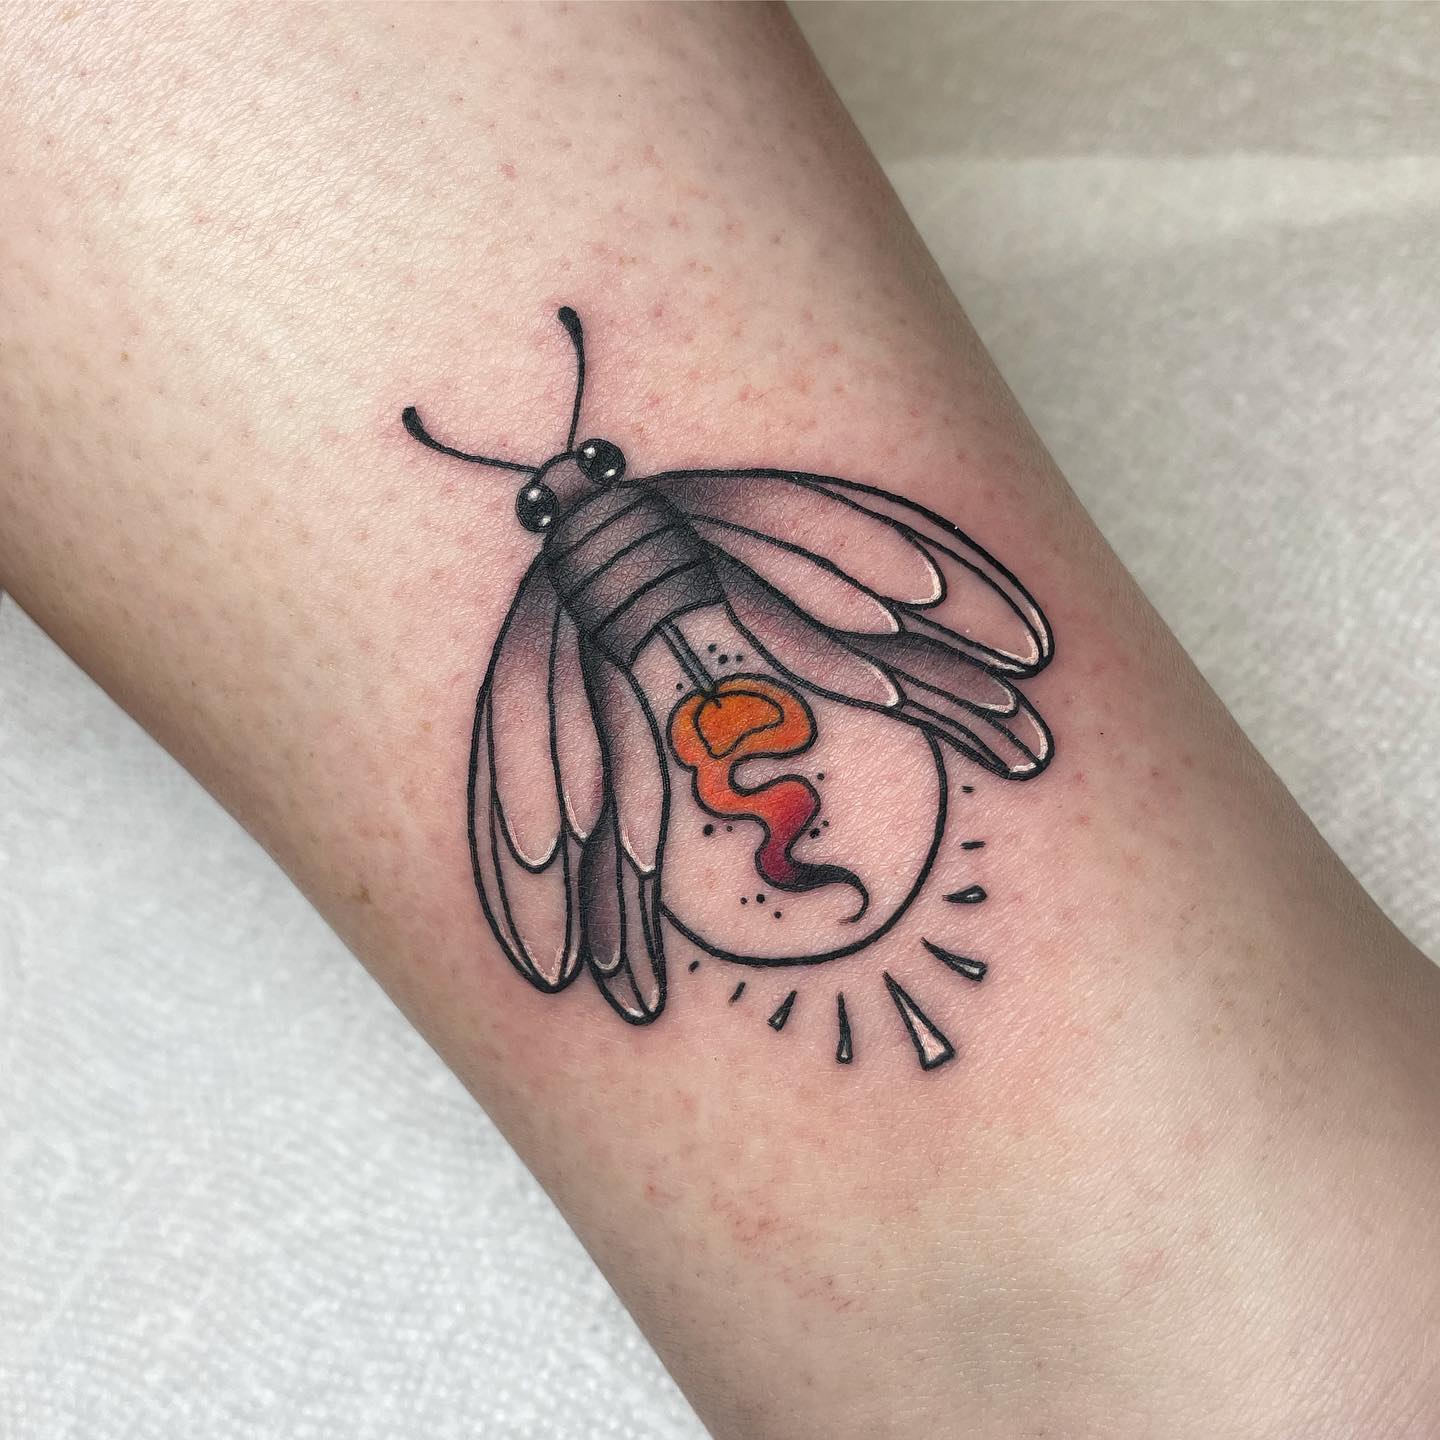 A bug on your ankle can show that you’ve surpassed a fear that you may have had once in your life. If you’re tough and you feel like you can conquer it all, this little piece is for you.